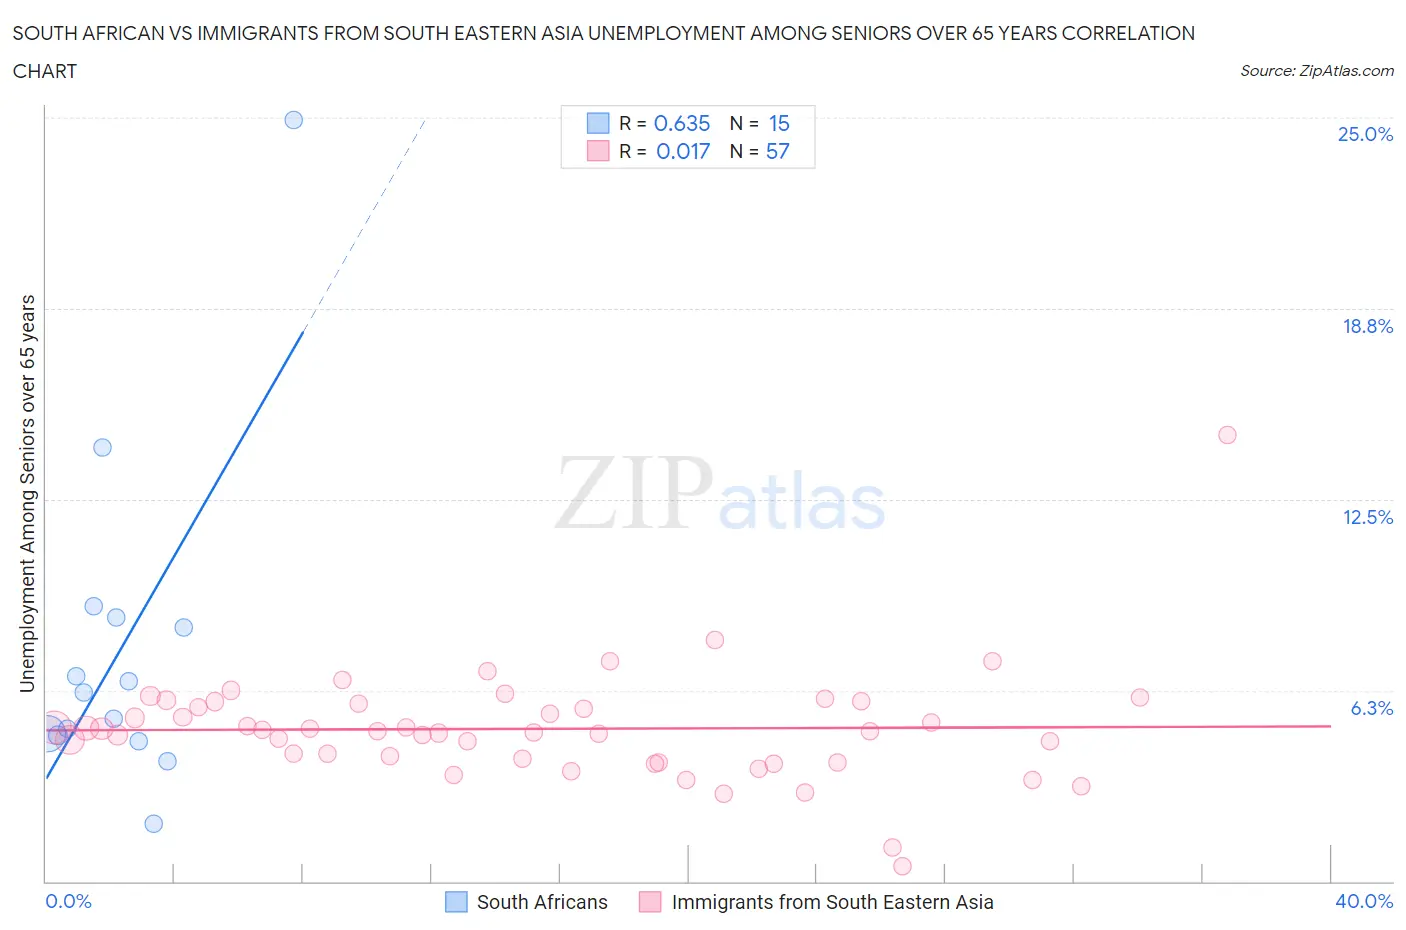 South African vs Immigrants from South Eastern Asia Unemployment Among Seniors over 65 years